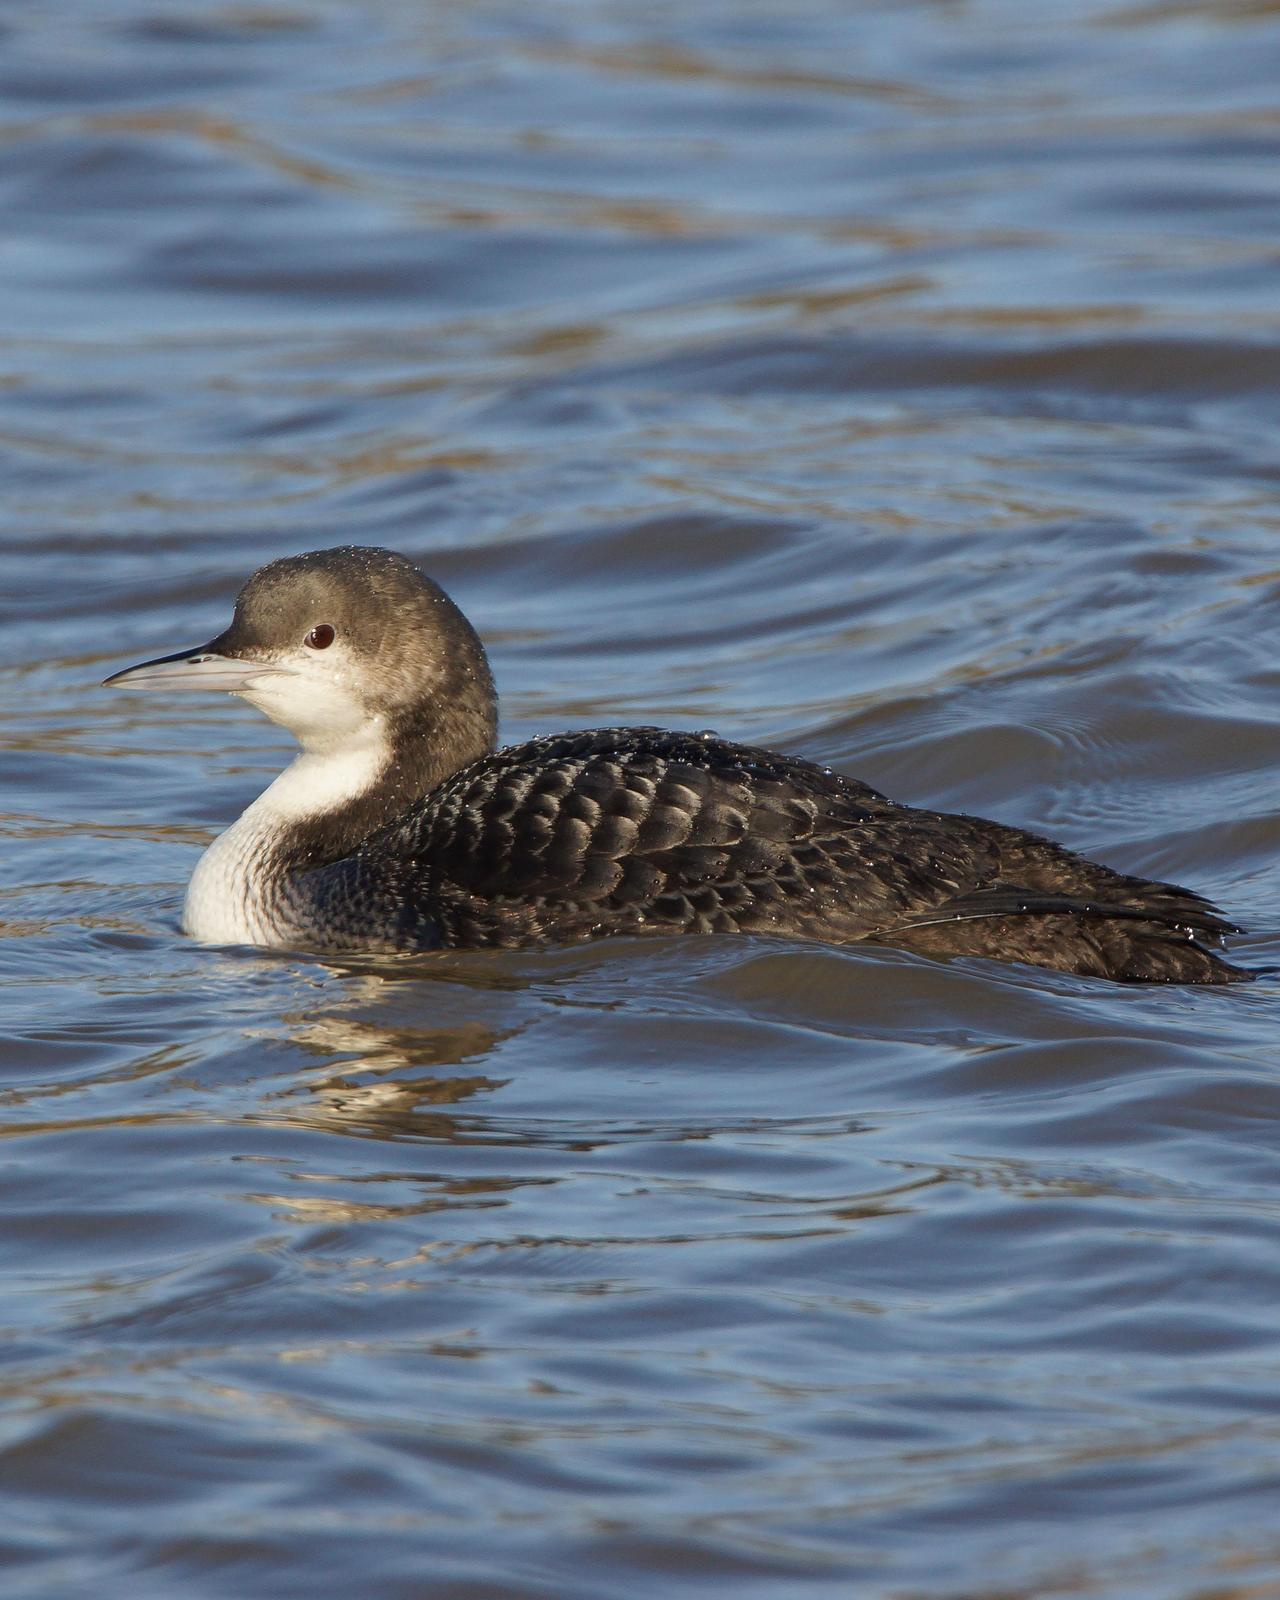 Pacific Loon Photo by Steve Percival